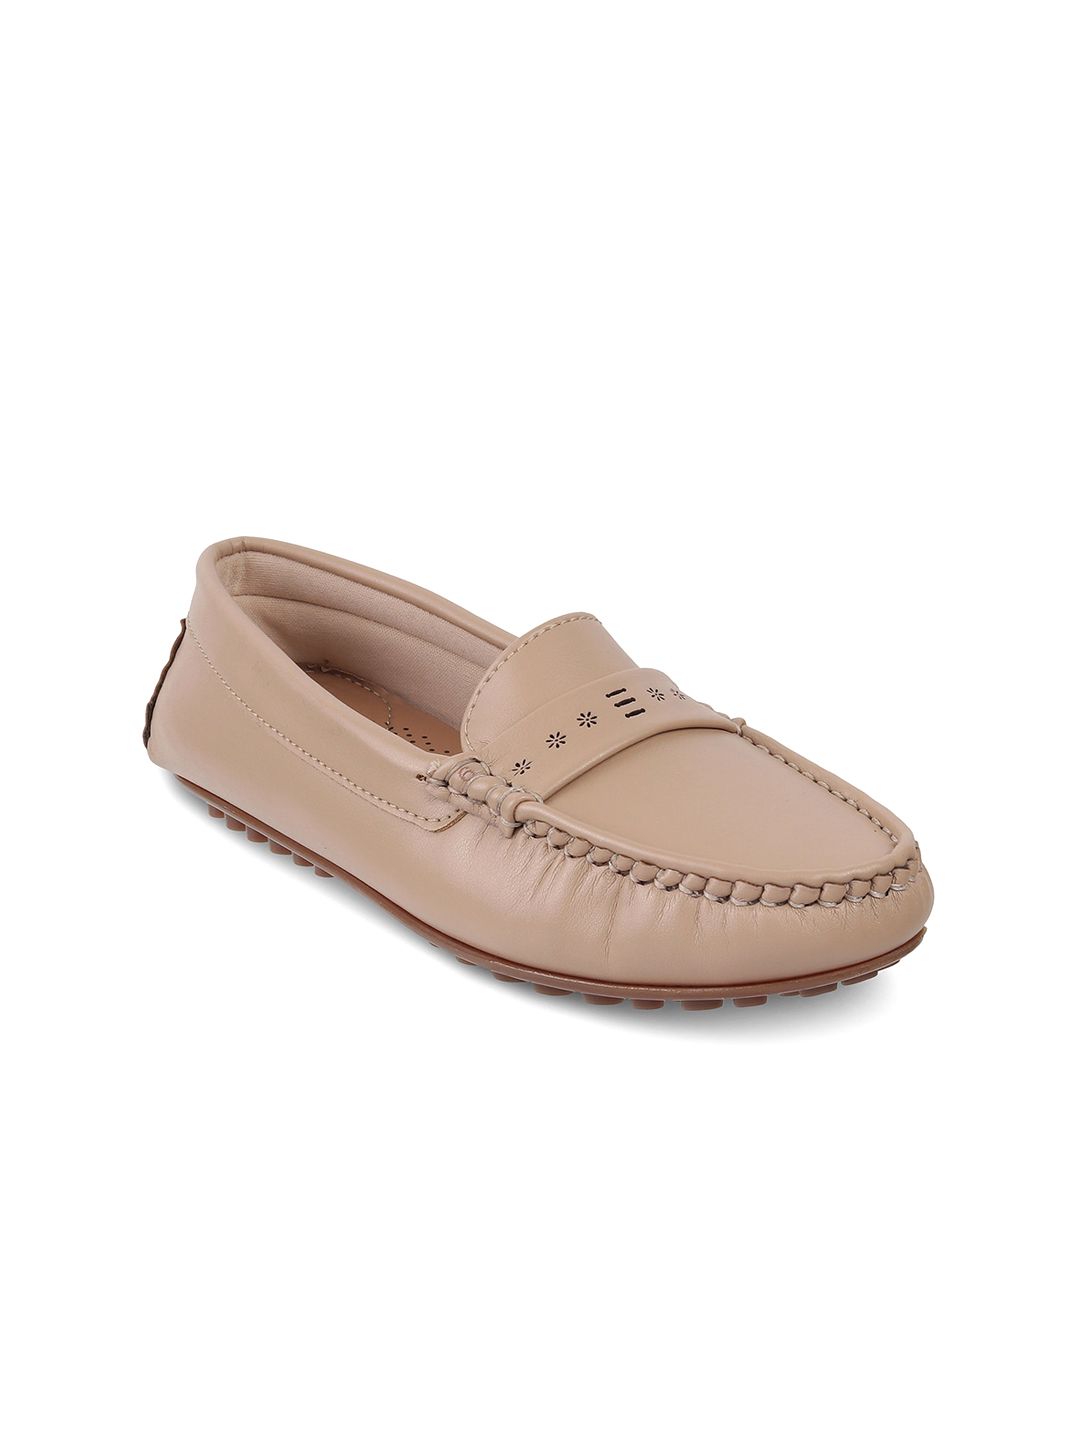 PEPPER Women Slip-On Loafers Price in India